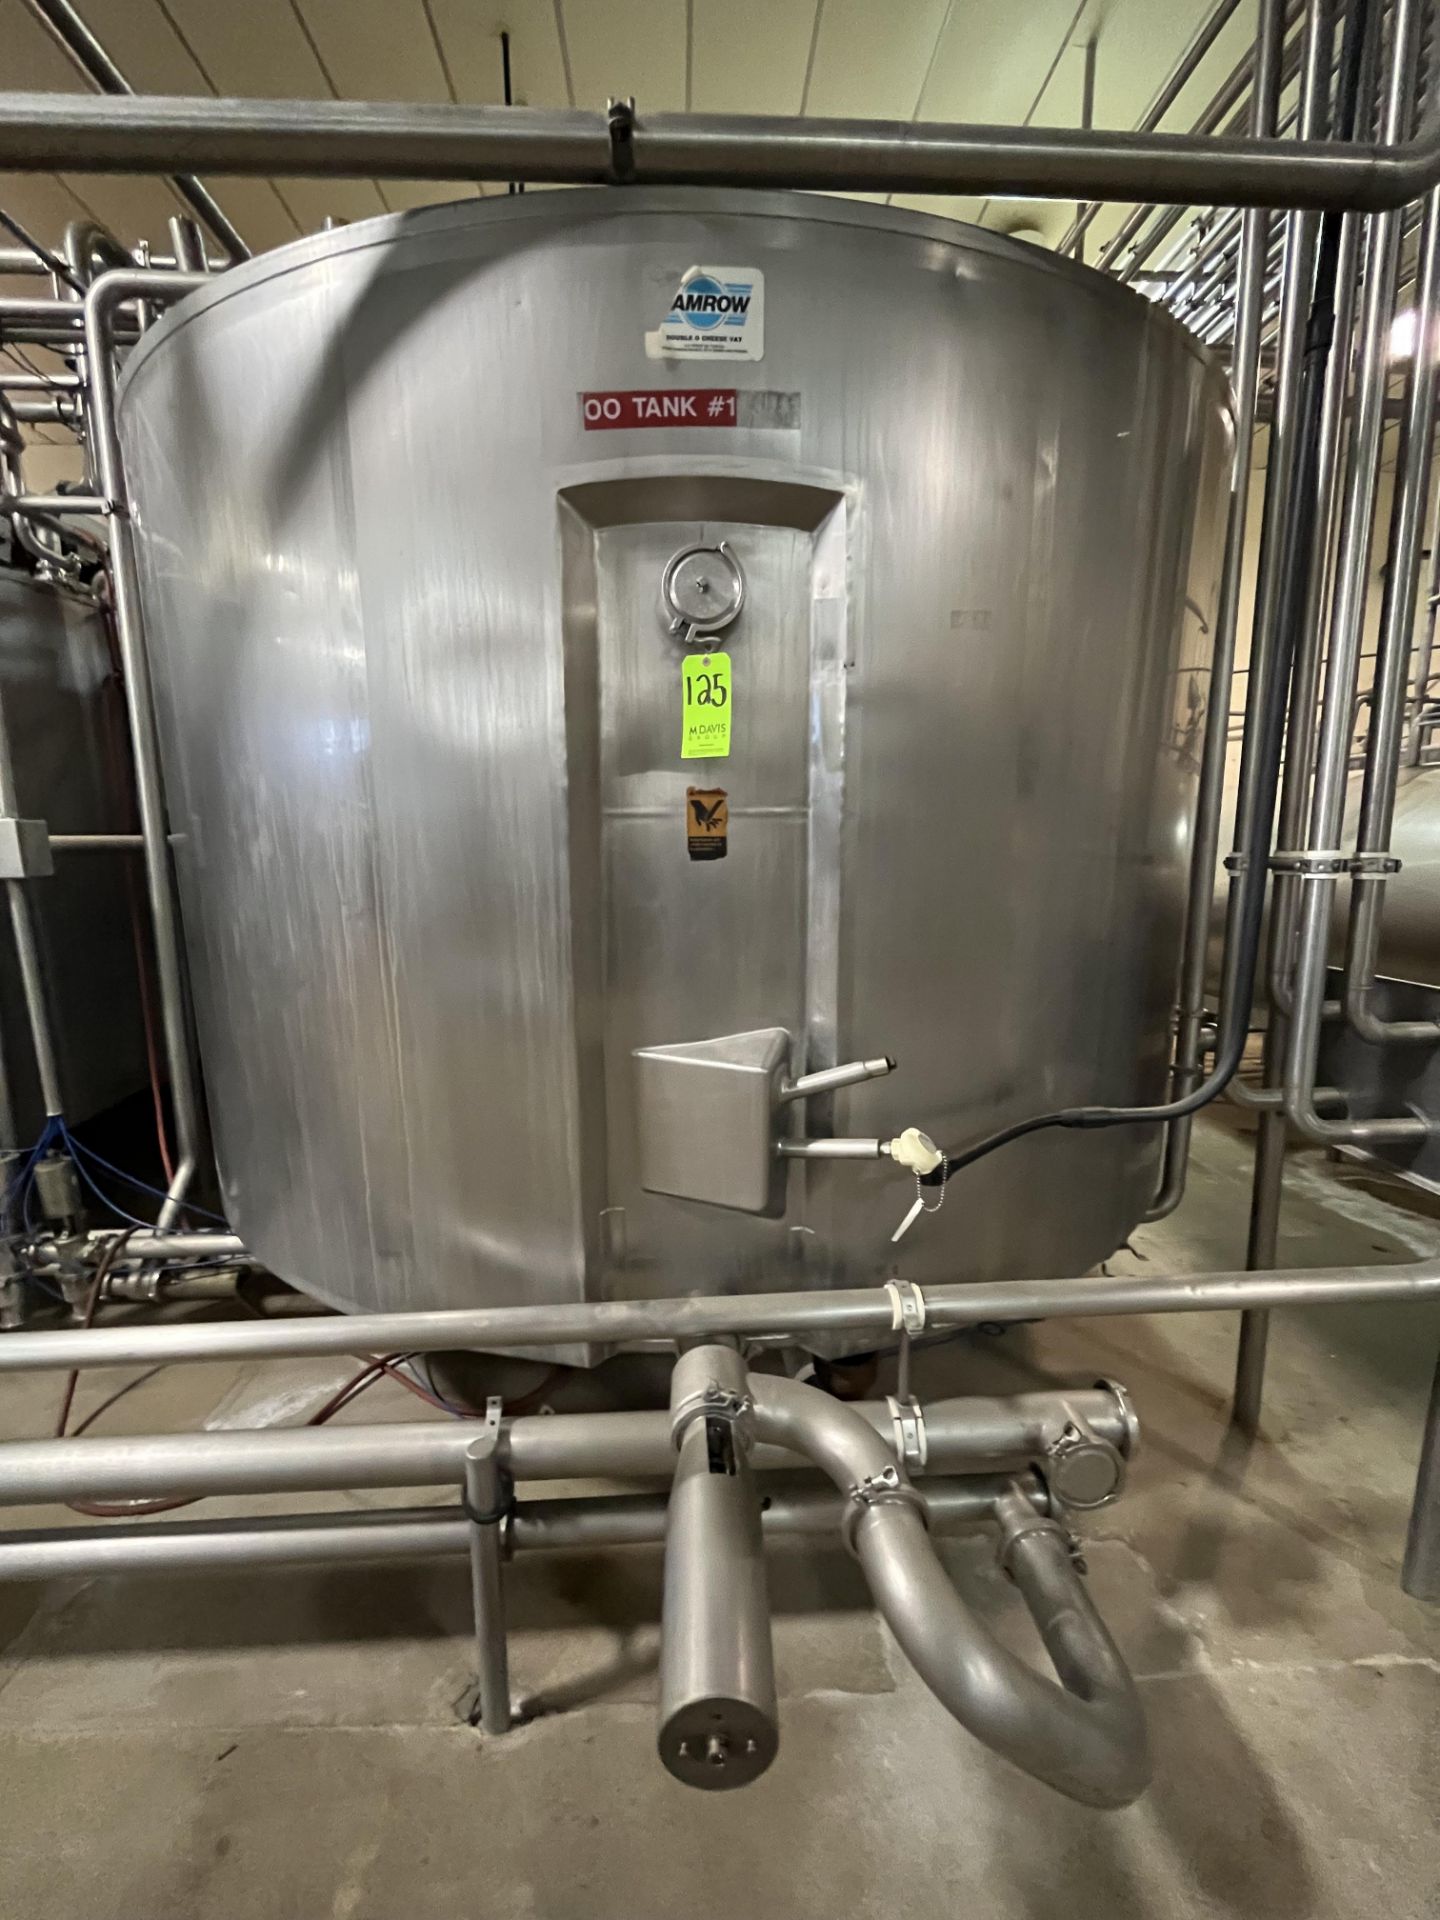 Damrow Double O S/S Cheese Vat (OO Tank #1) (LOCATED IN MANTECA, CA)